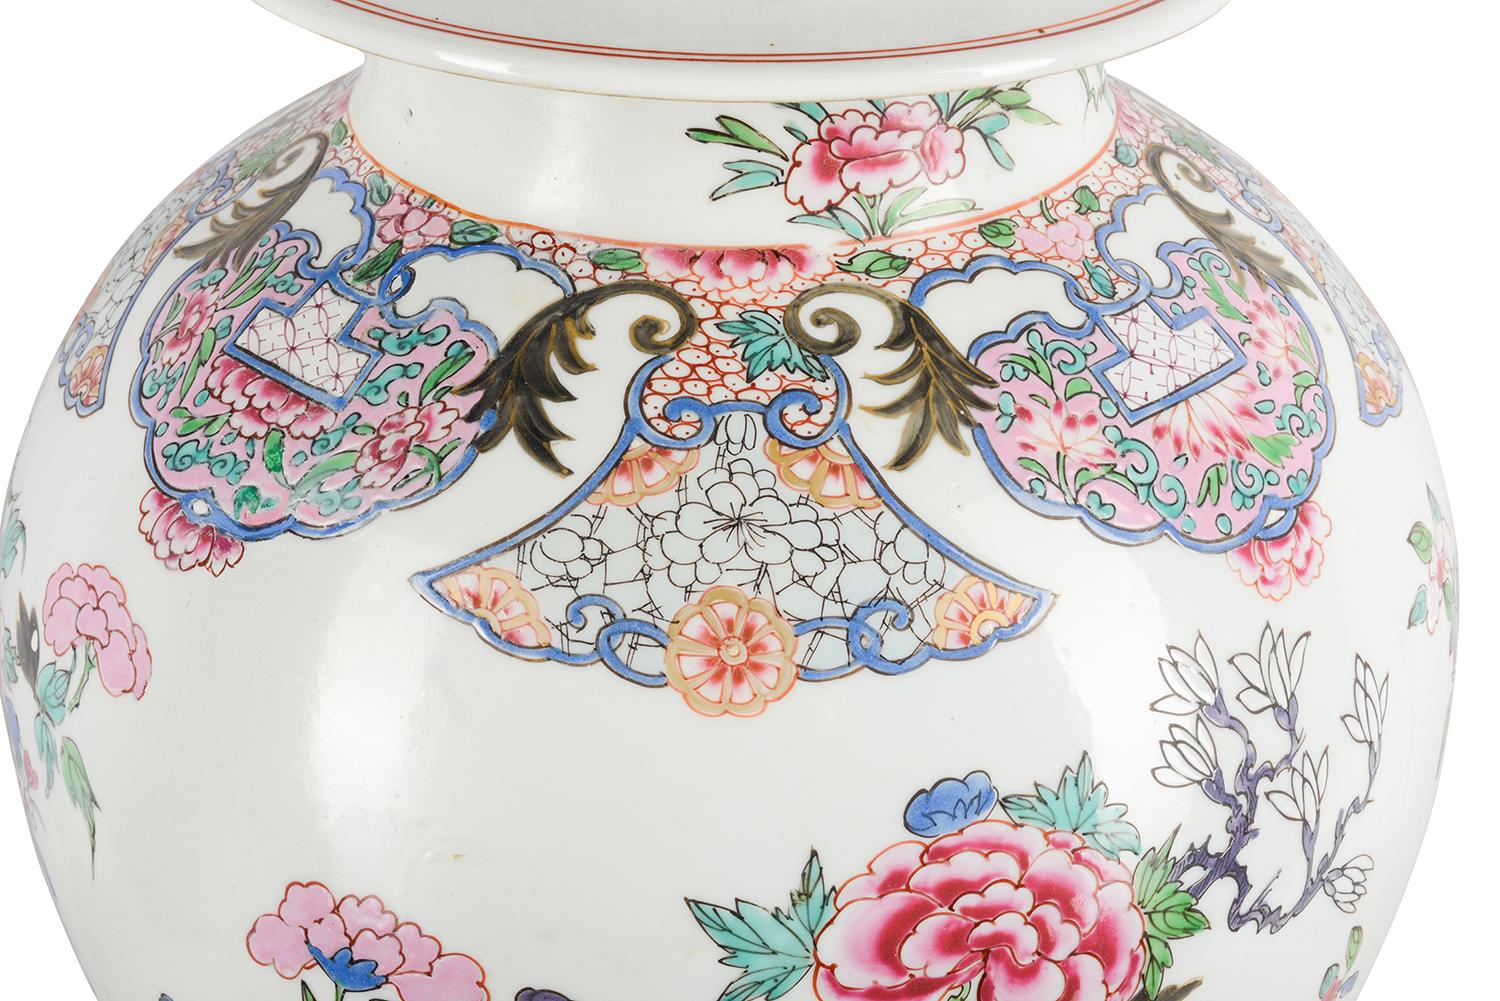 Samson Porcelain Famille Rose Style Lidded Vase In Good Condition For Sale In Brighton, Sussex